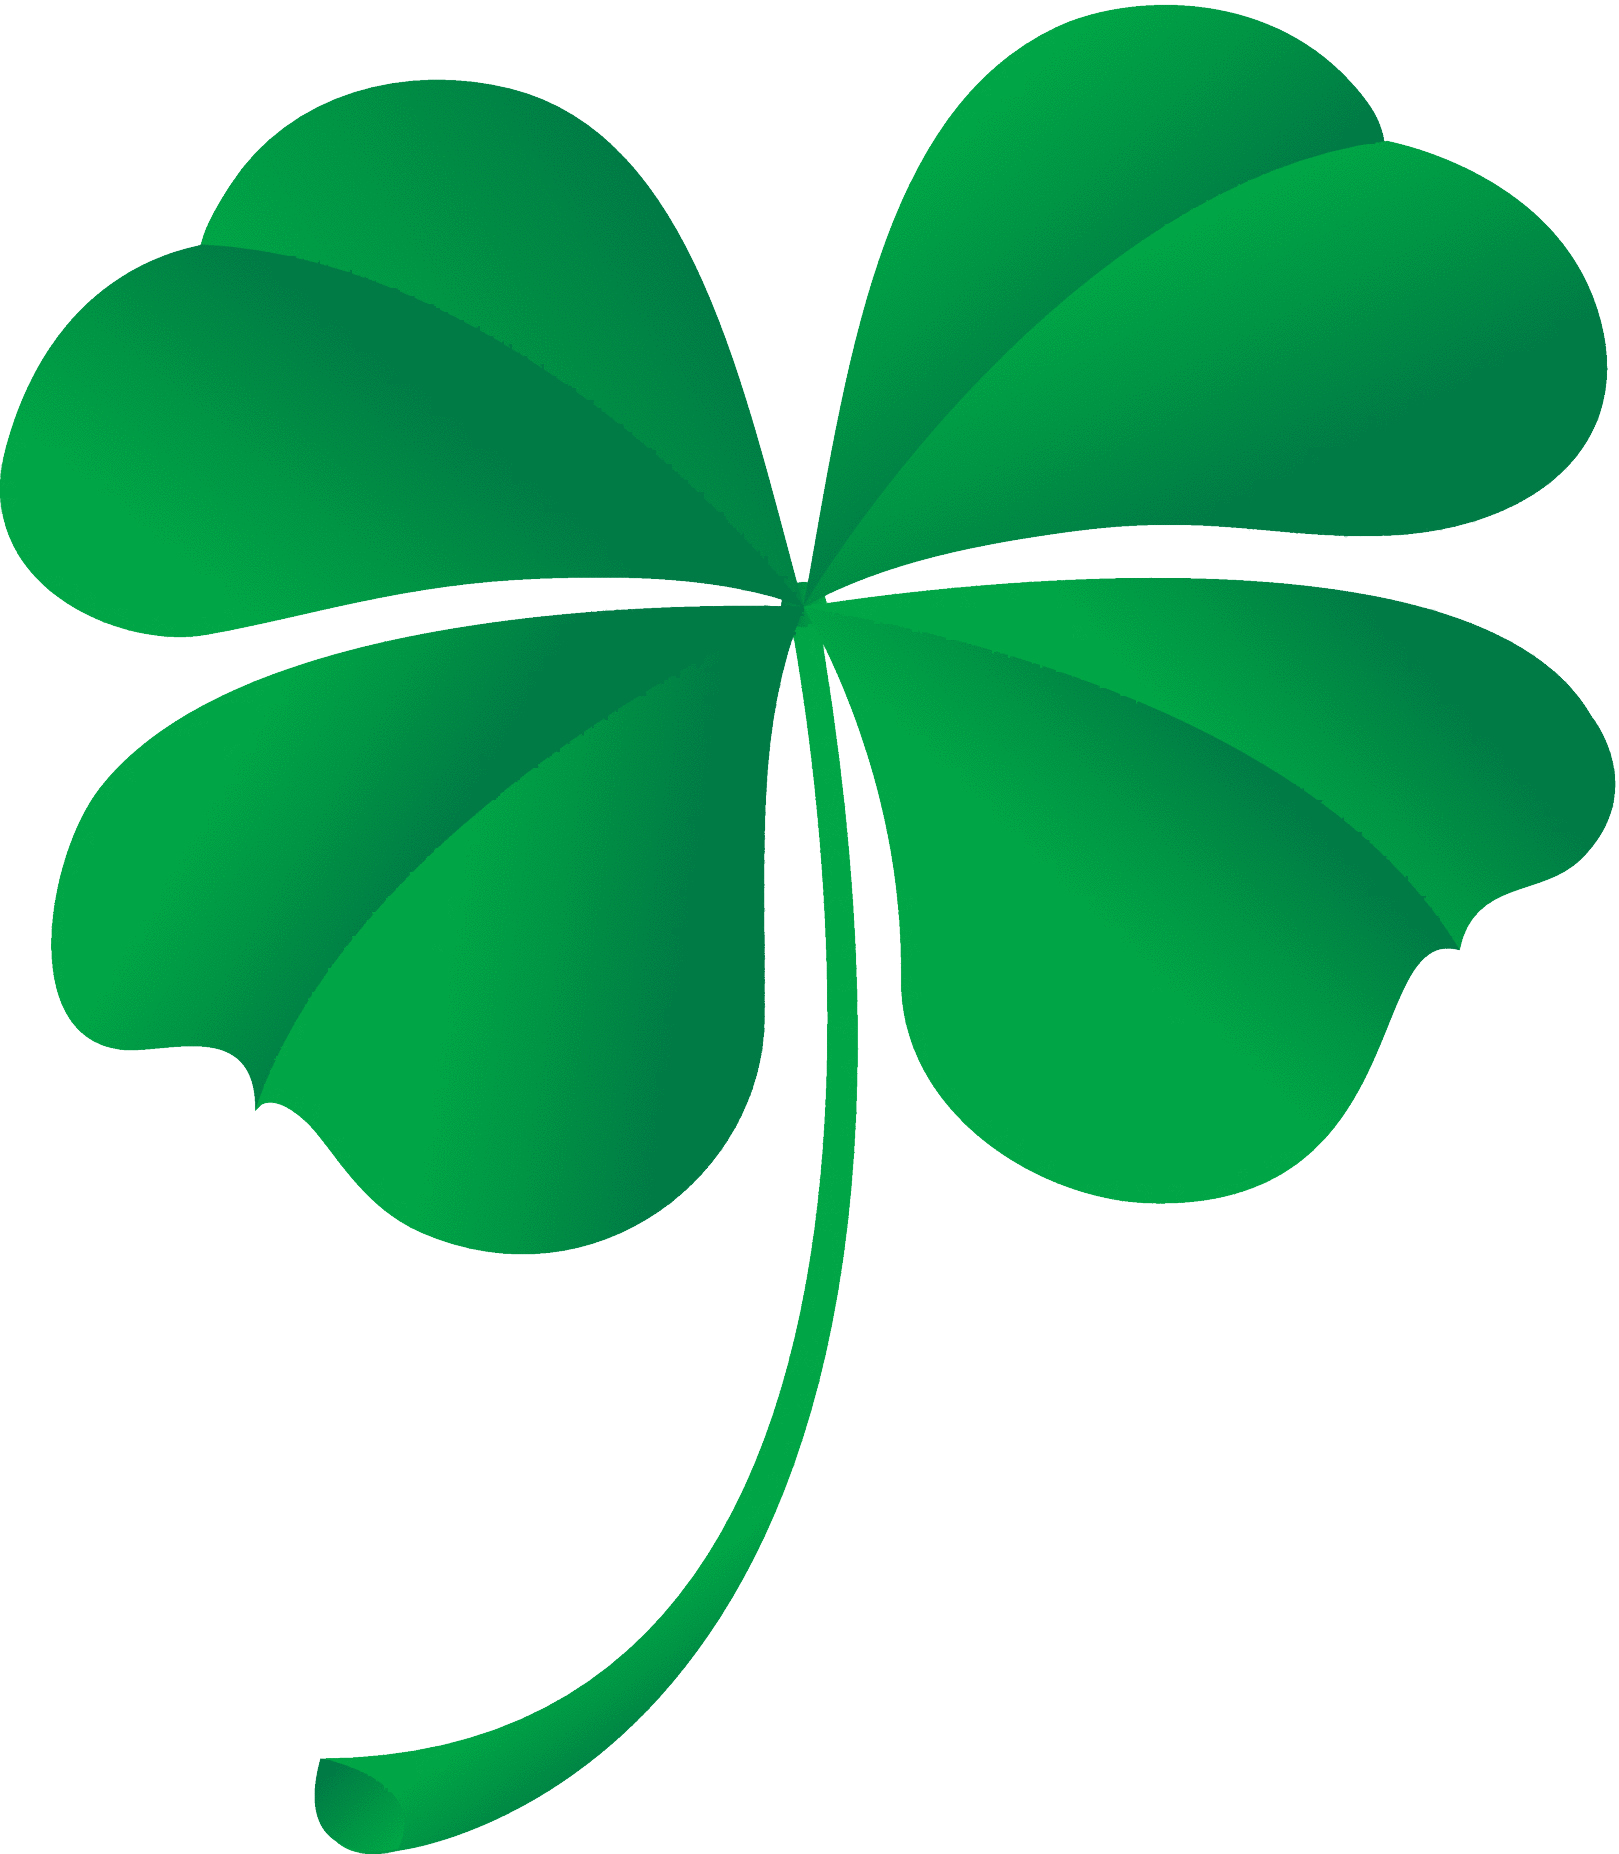 Clover PNG Image